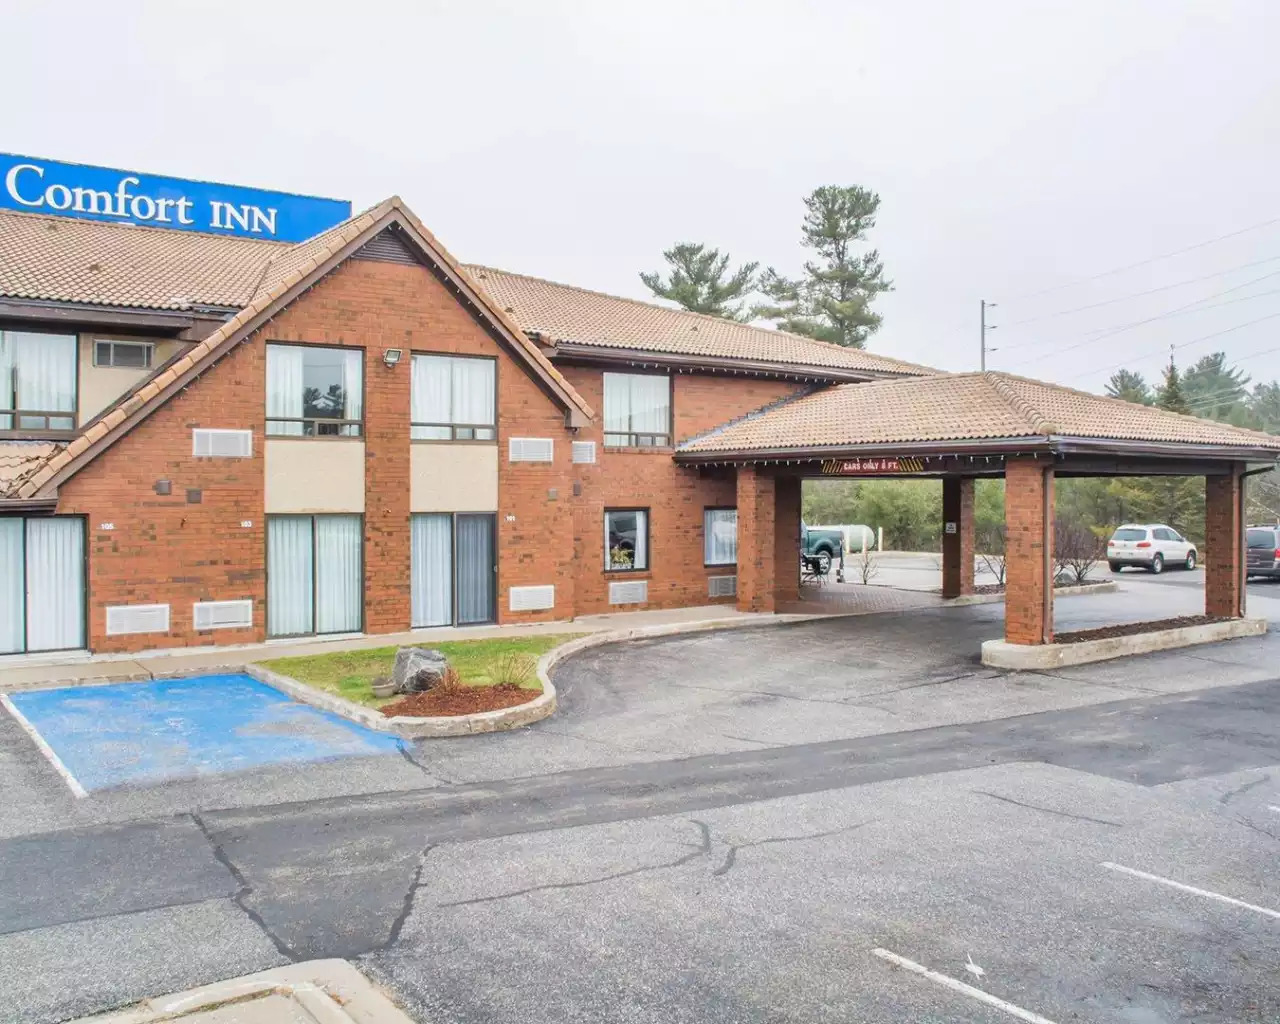 Photo of Comfort Inn Parry Sounds, Parry Sound, ON, Canada